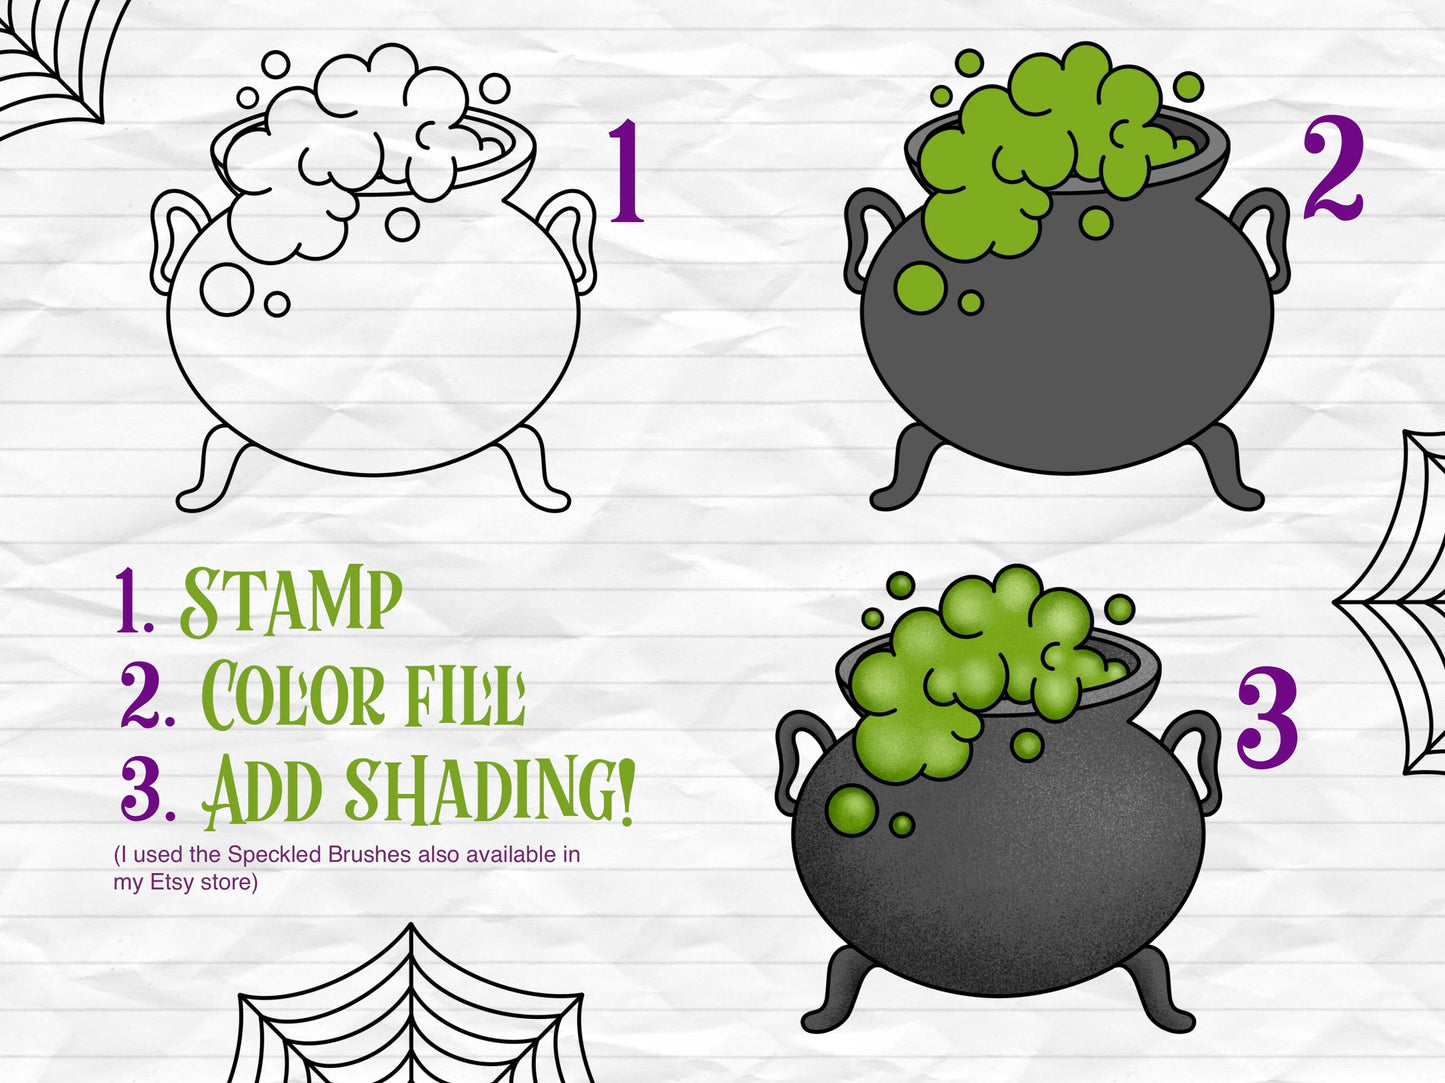 Spooky Stamps Brushes